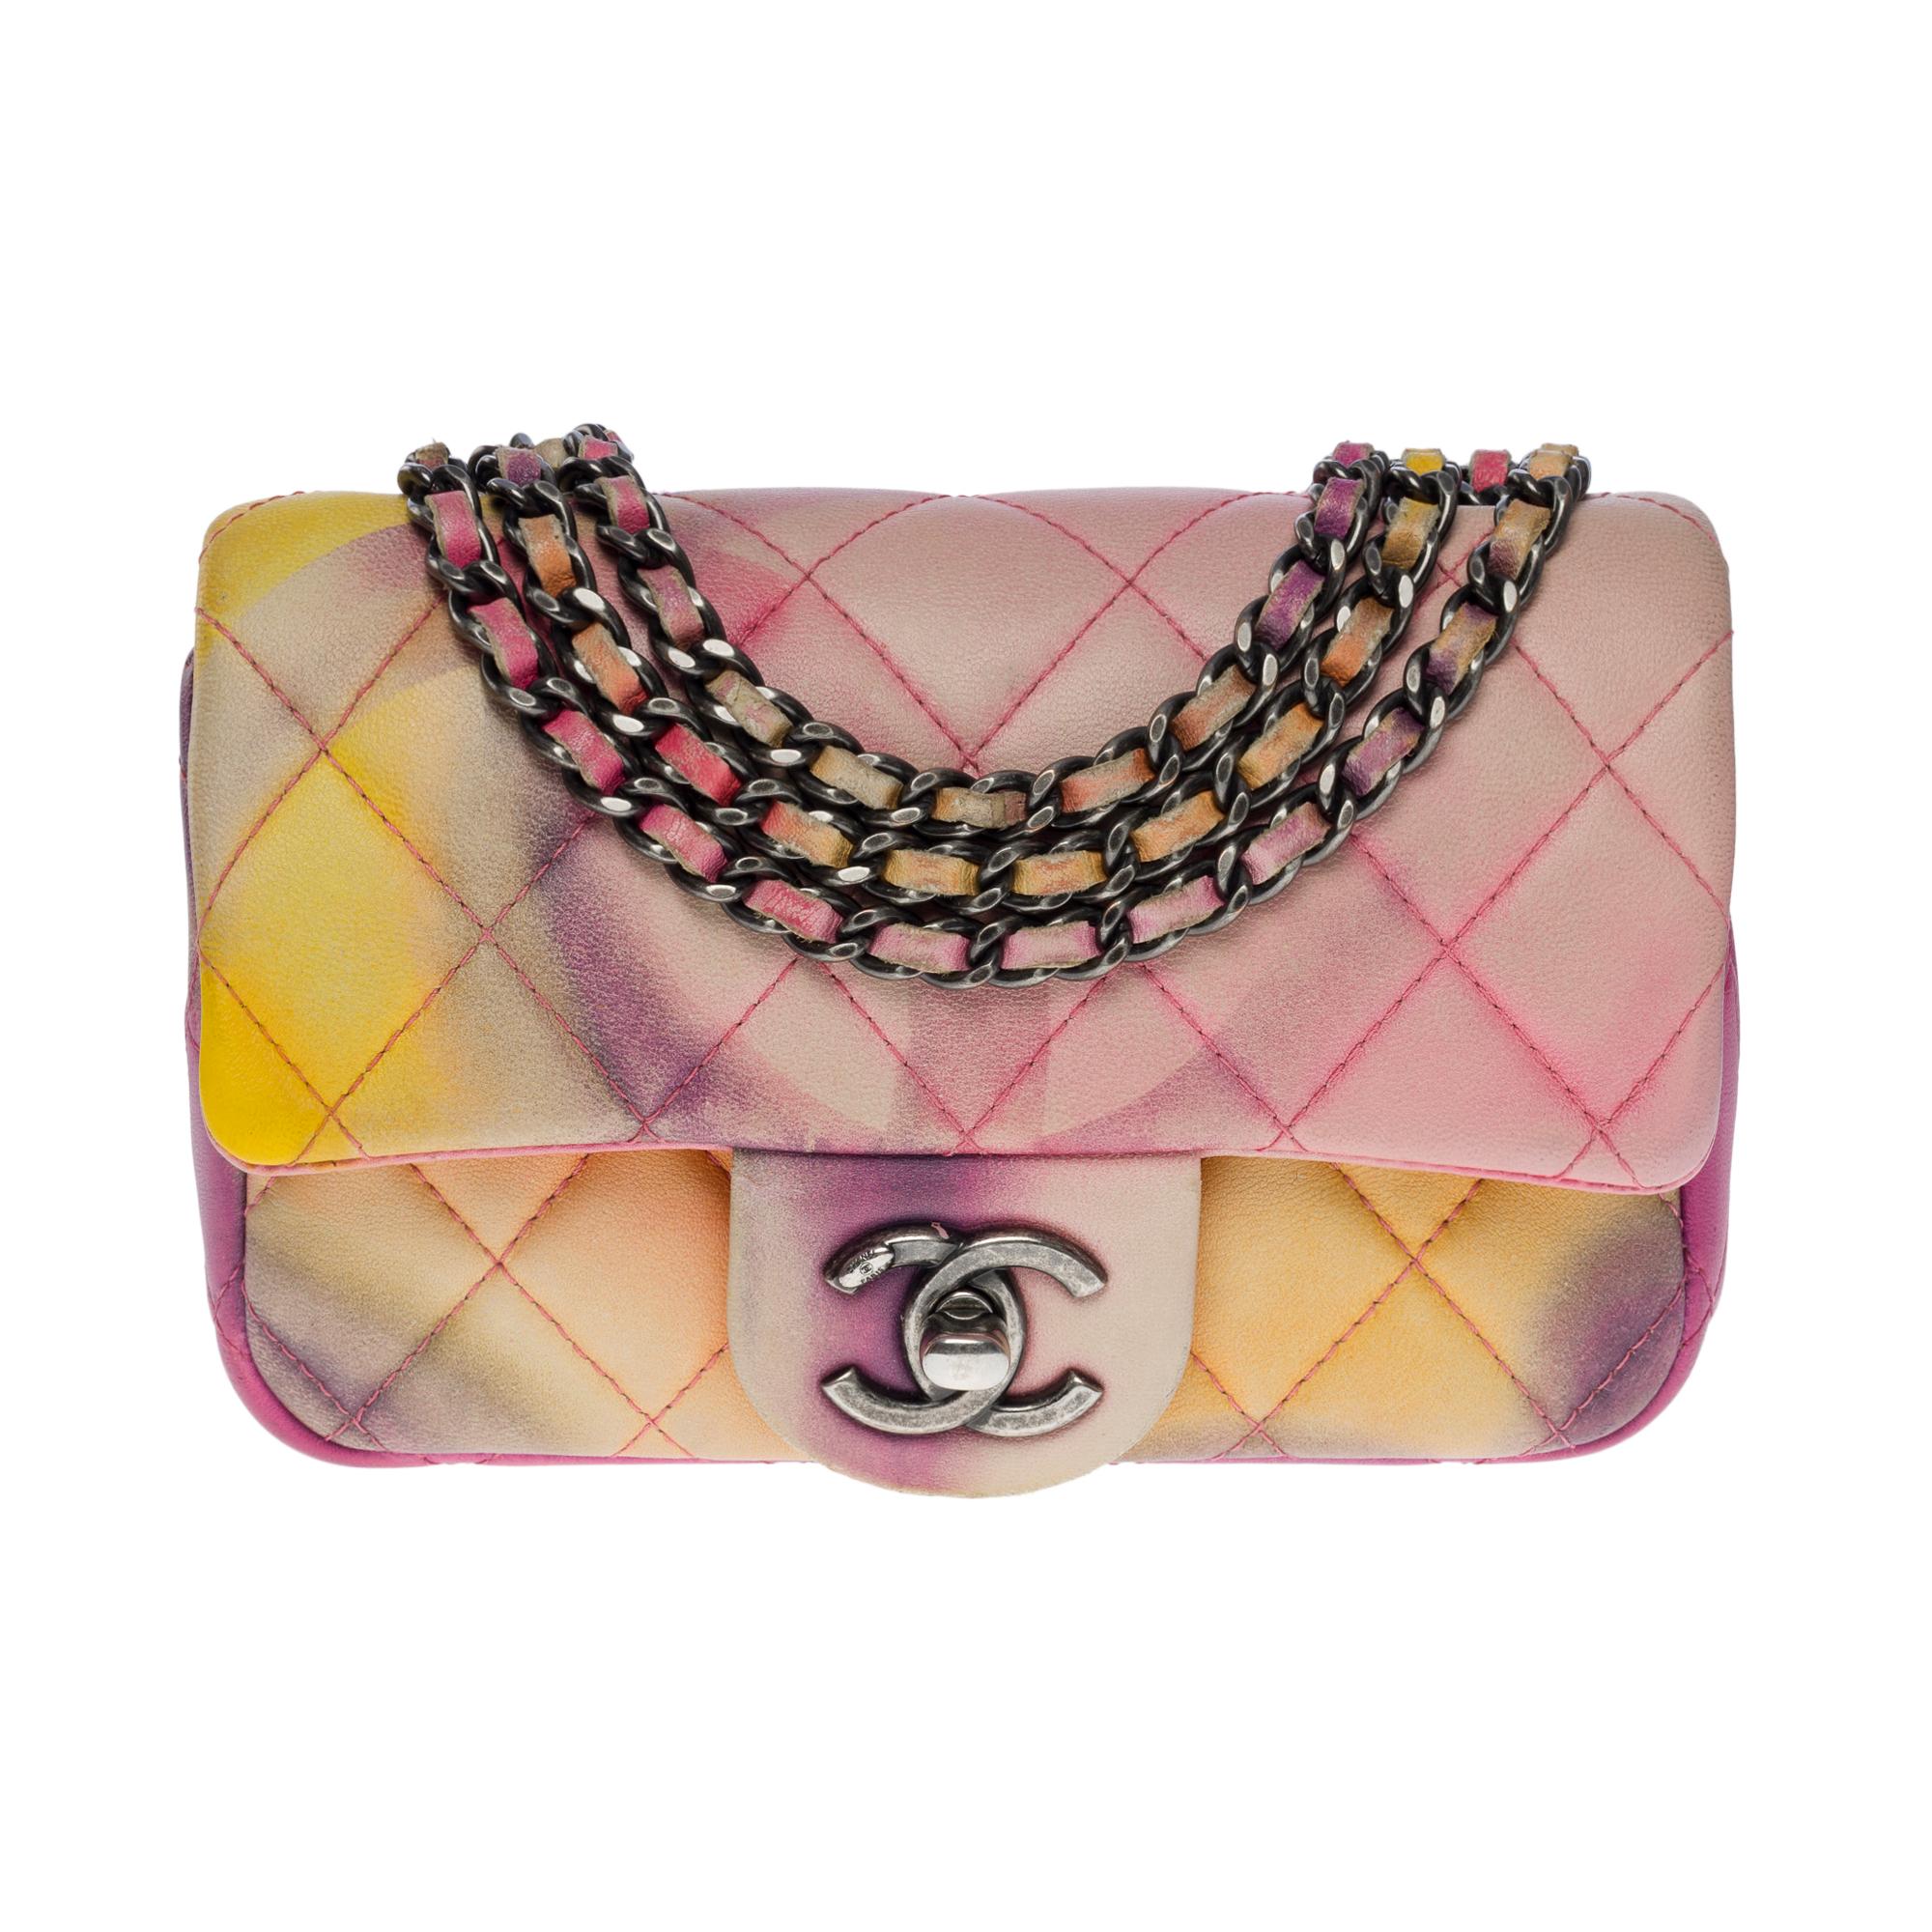 CHANEL Pop Art N°5 Bag in Graffiti Leather and Shearling Fabric at 1stDibs